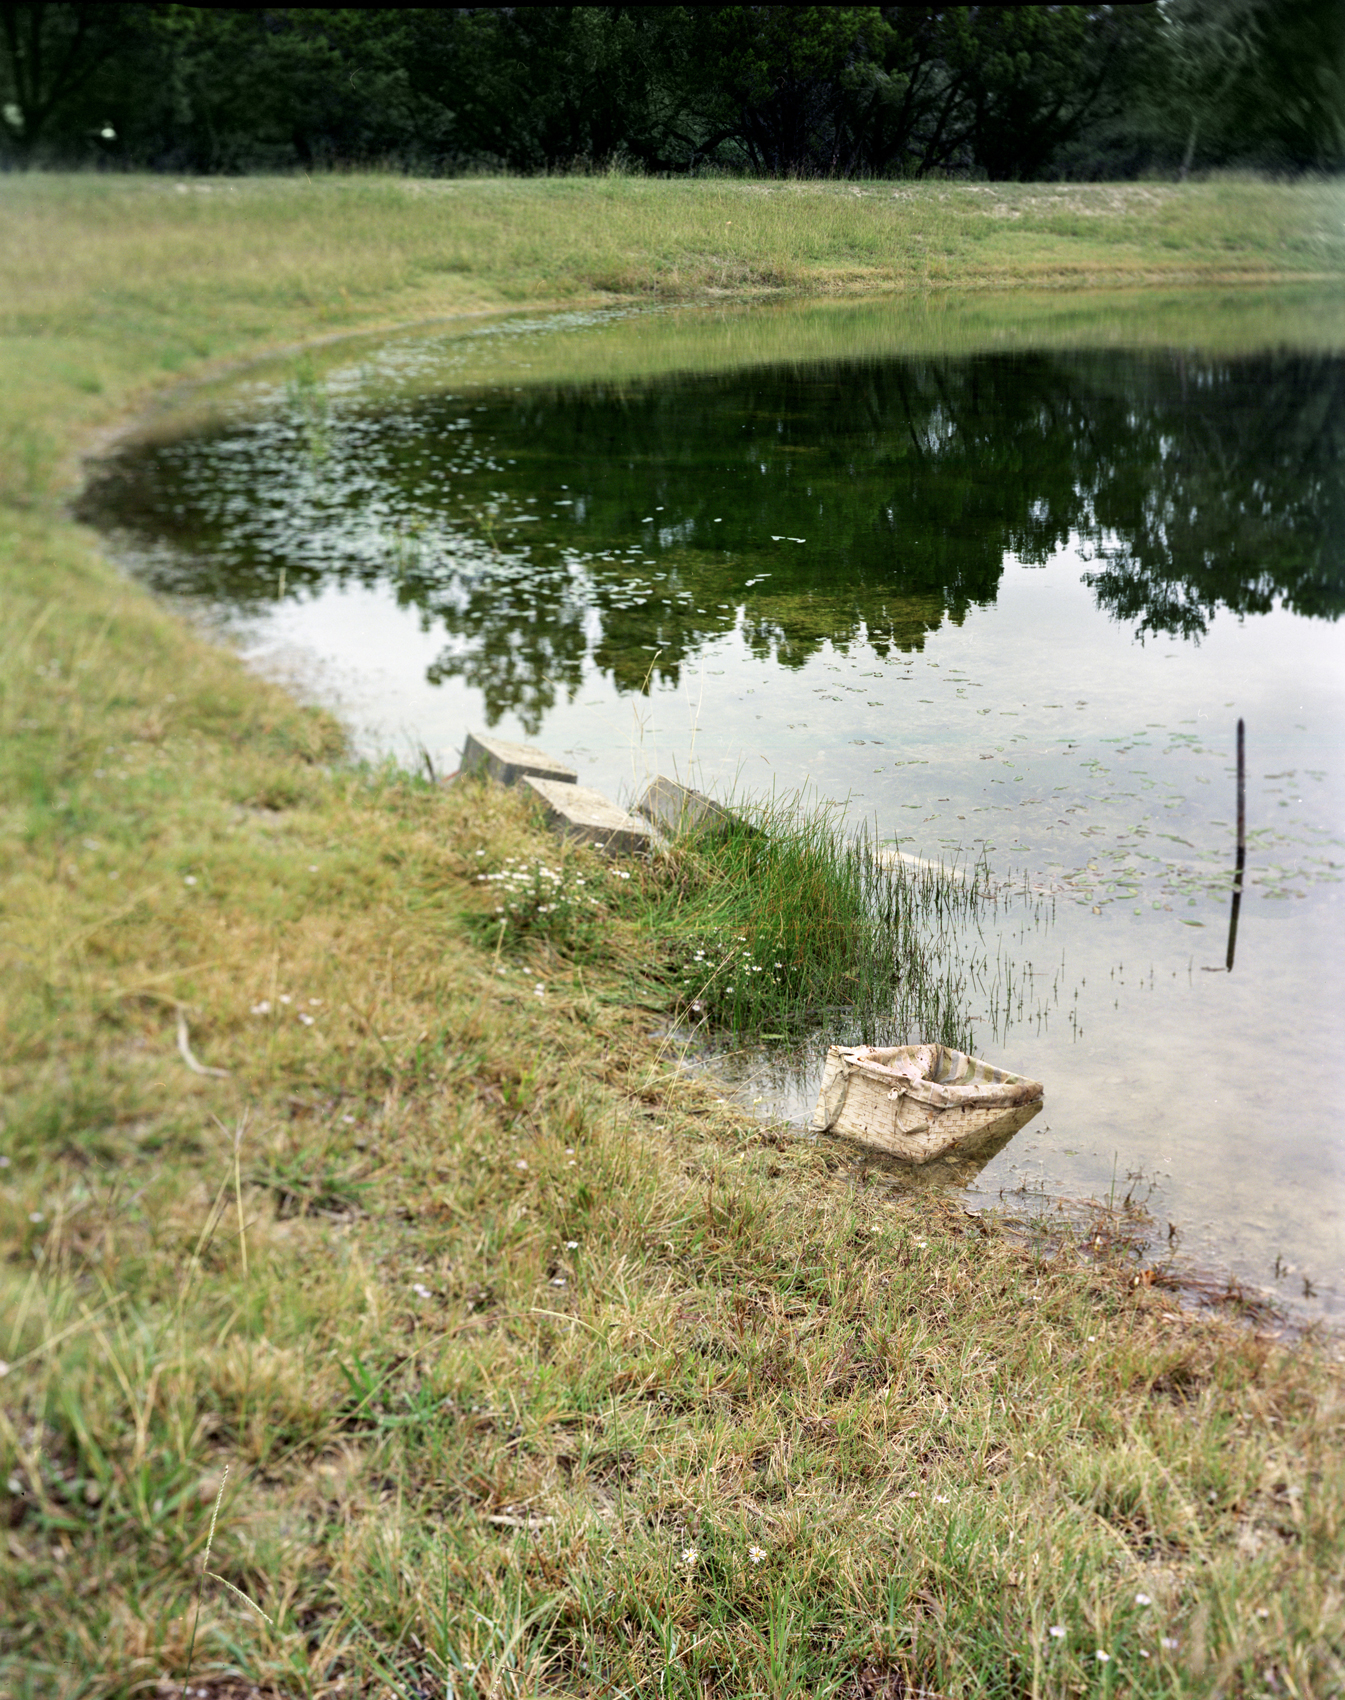 Claire Boston, A Sinking Feeling, Archival Pigment Print, Fall 2021, 35in. x 30in.